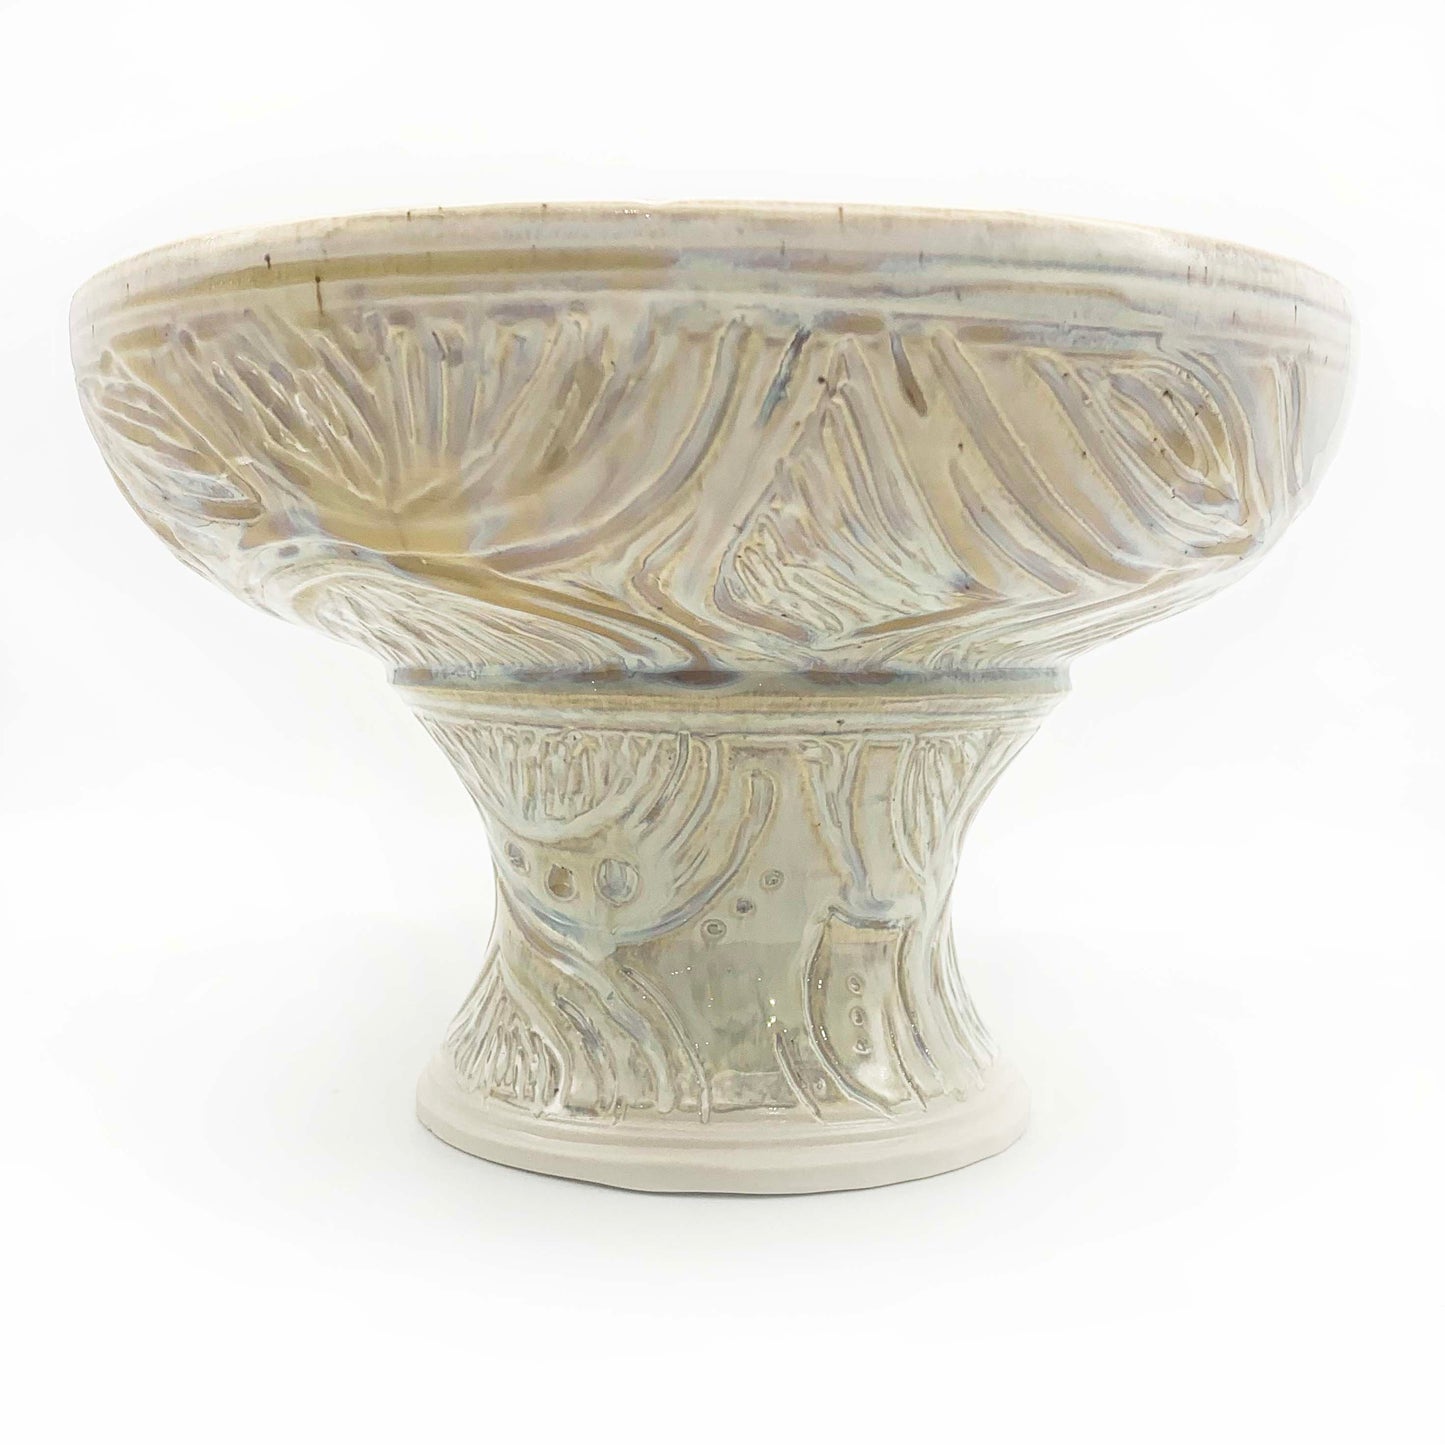 A Drink Well Collection : Iridescent Footed Bowl - Large